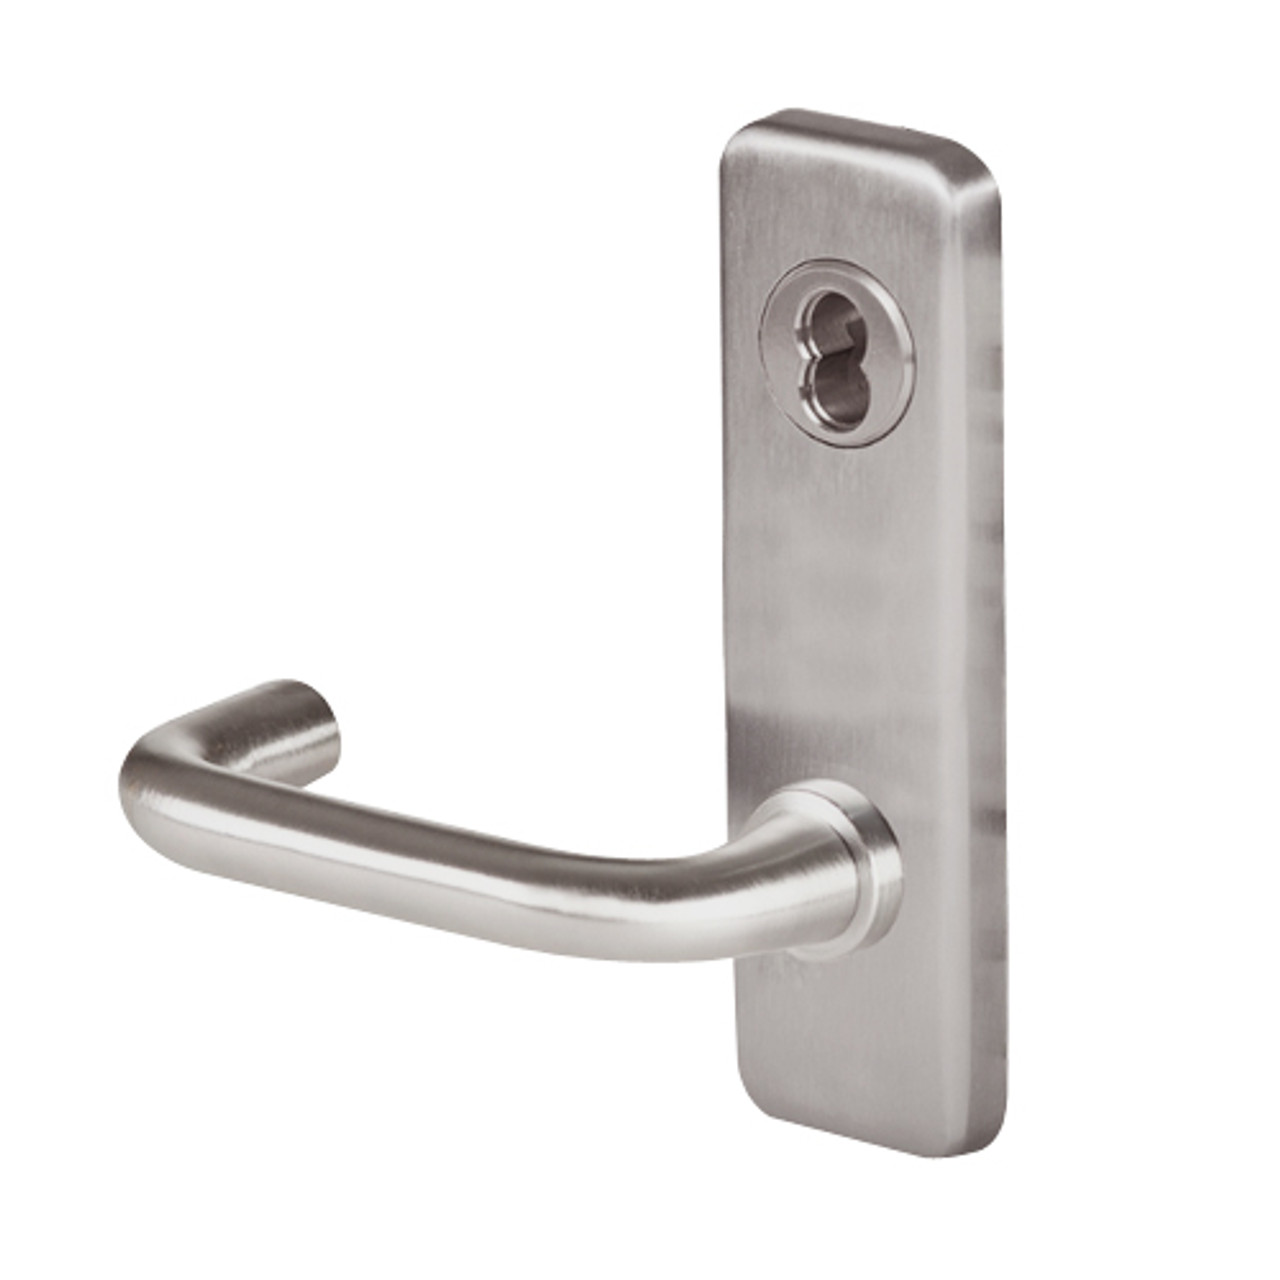 45H0L3J630 Best 40H Series Privacy with Deadbolt Heavy Duty Mortise Lever Lock with Solid Tube Return Style in Satin Stainless Steel